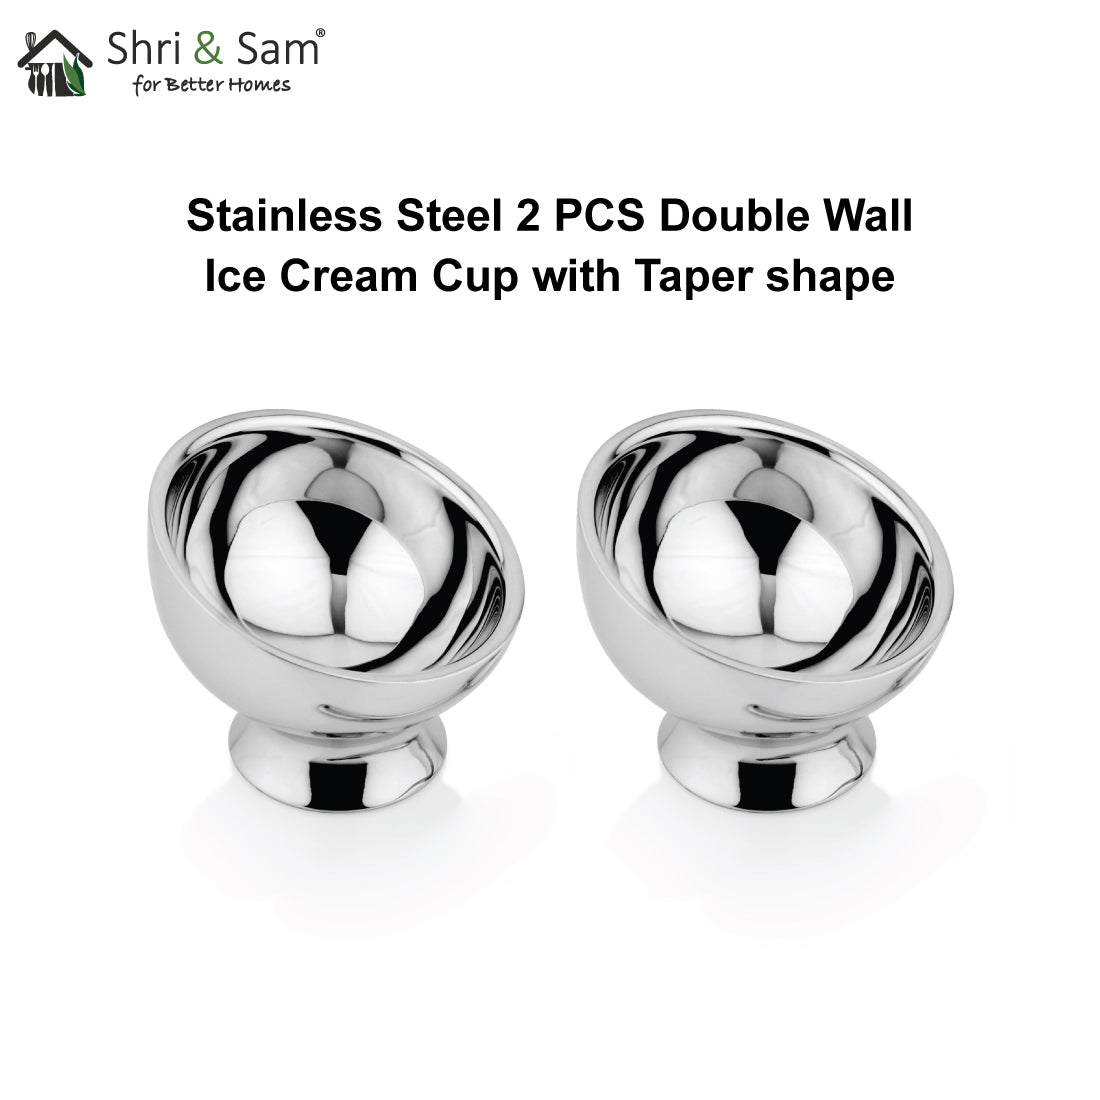 Stainless Steel 2 PCS Double Wall Ice Cream Cup with Taper shape